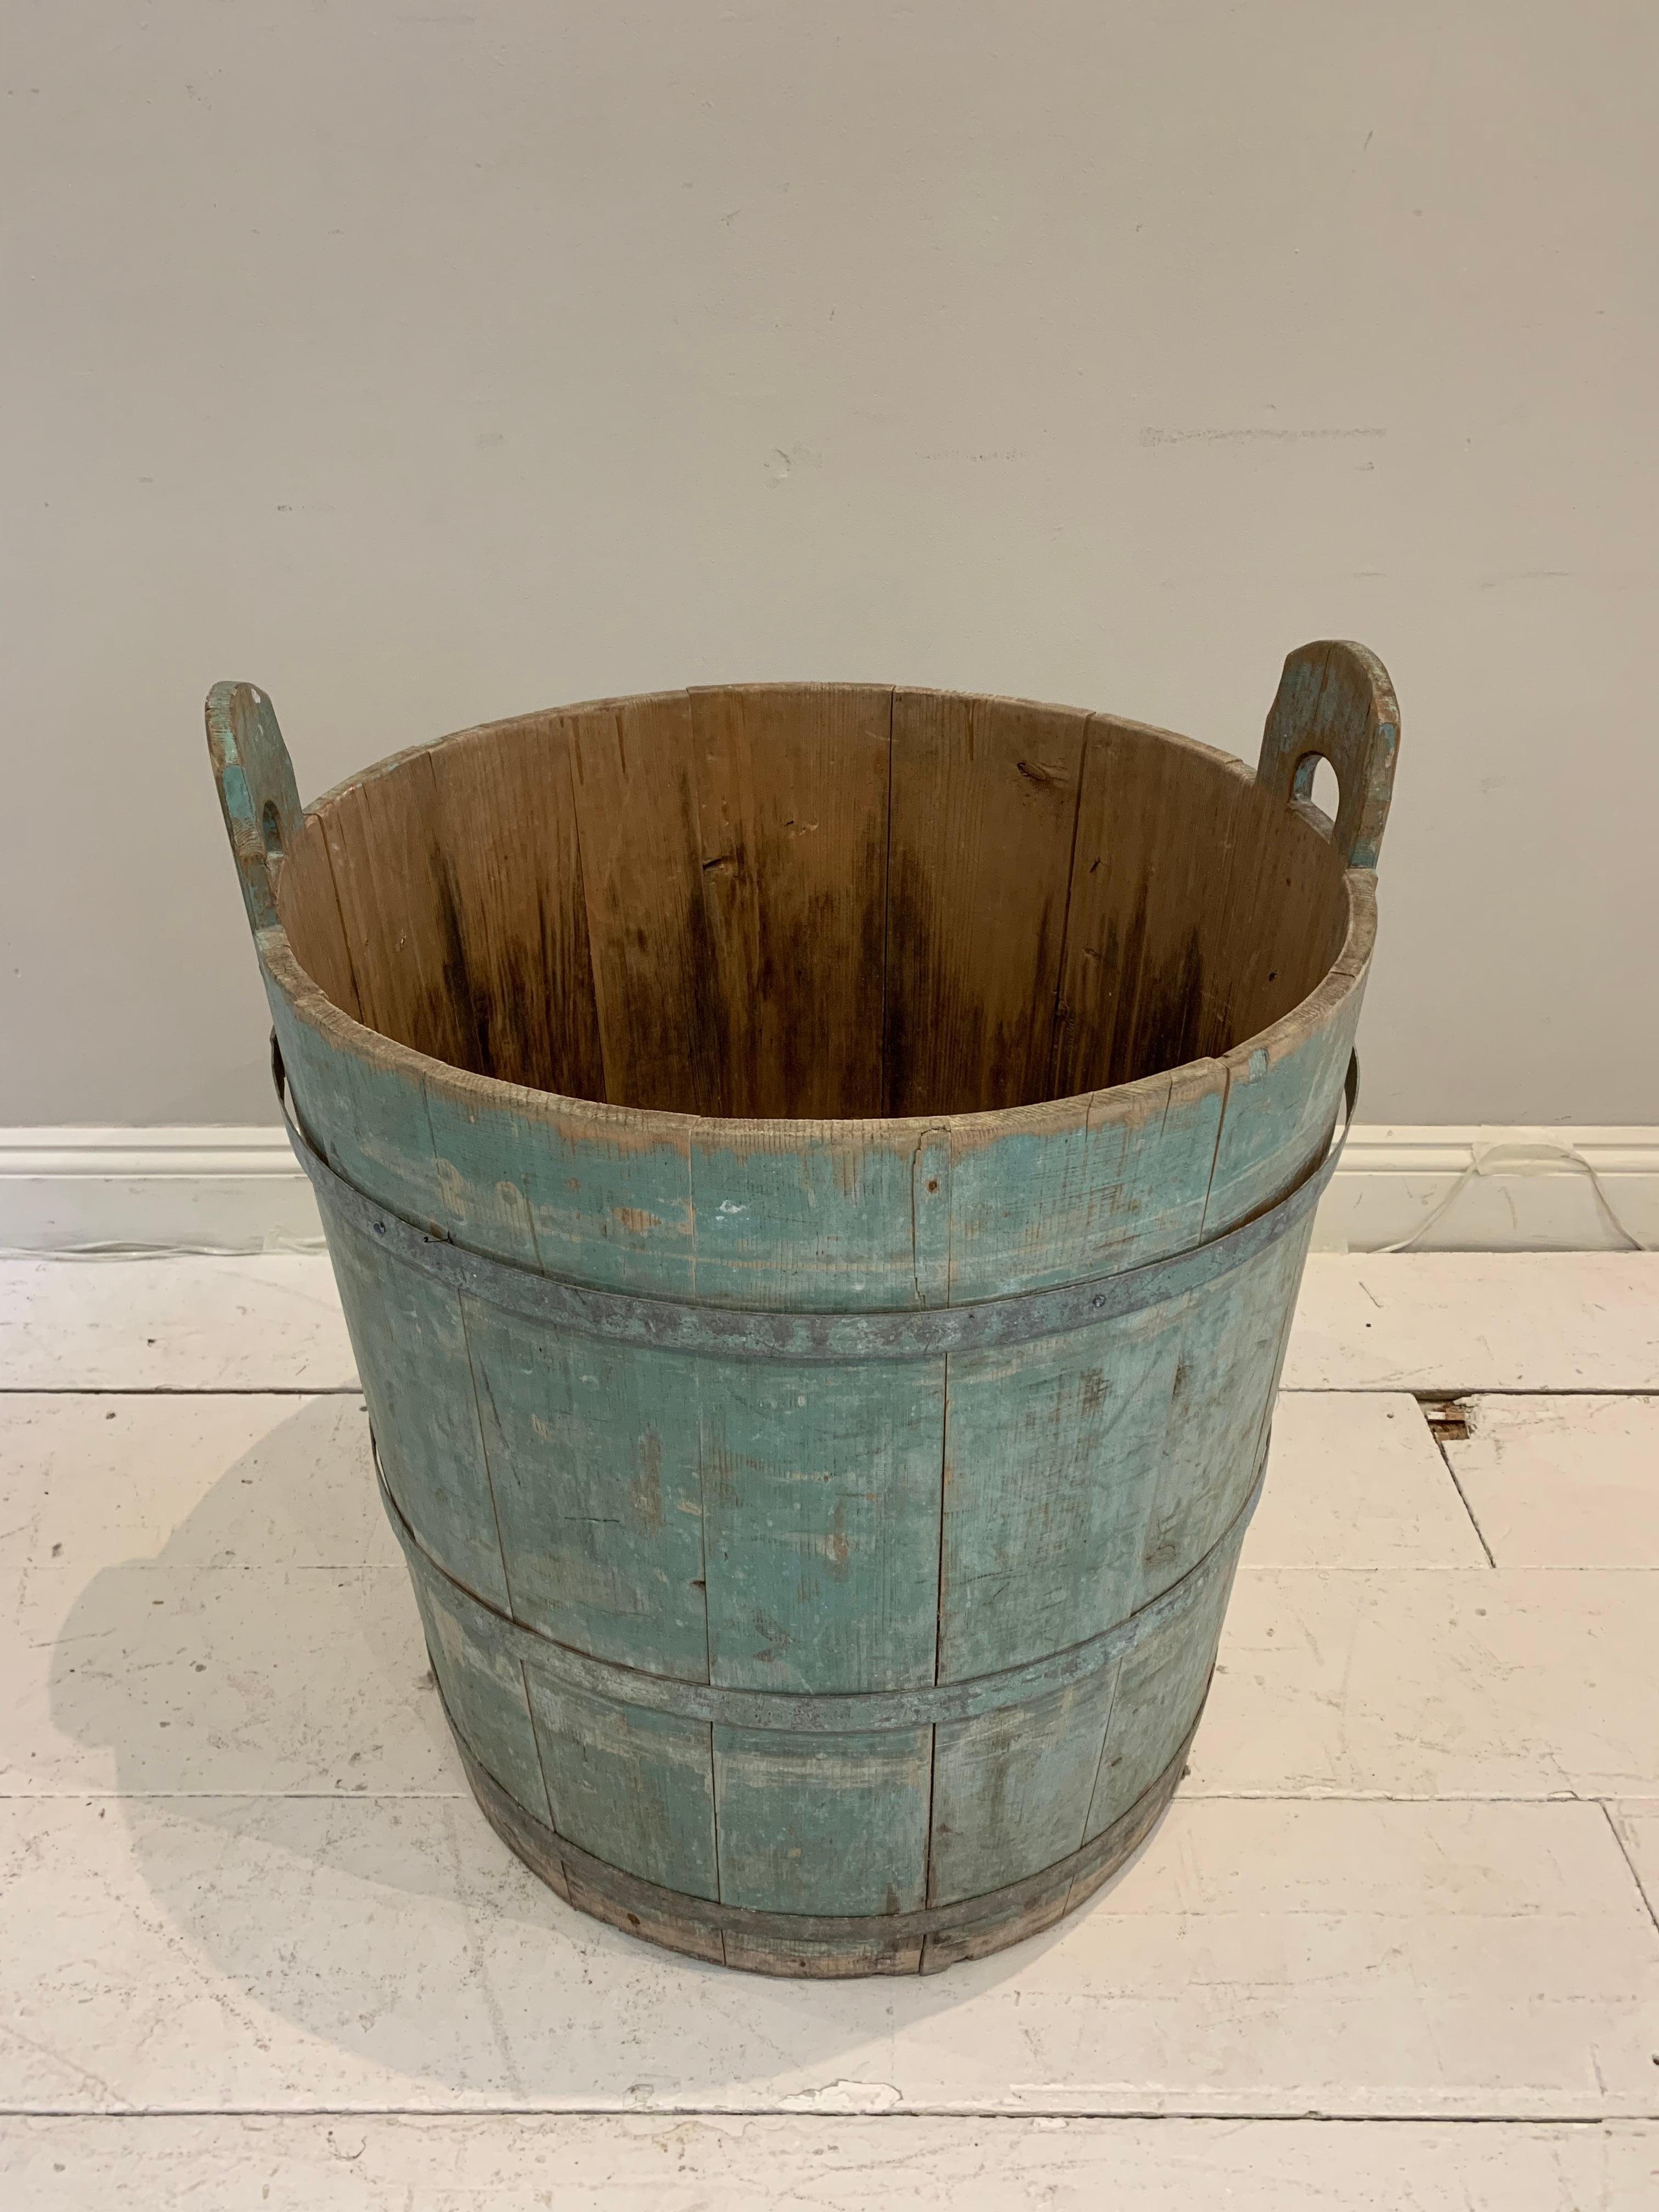 An 18th century Swedish rustic painted decorative handled barrel retaining its wonderful original blue colour with contrasting natural unpainted wood inside. A beautiful piece perfect as a decorative piece on its own or with a large plant/tree